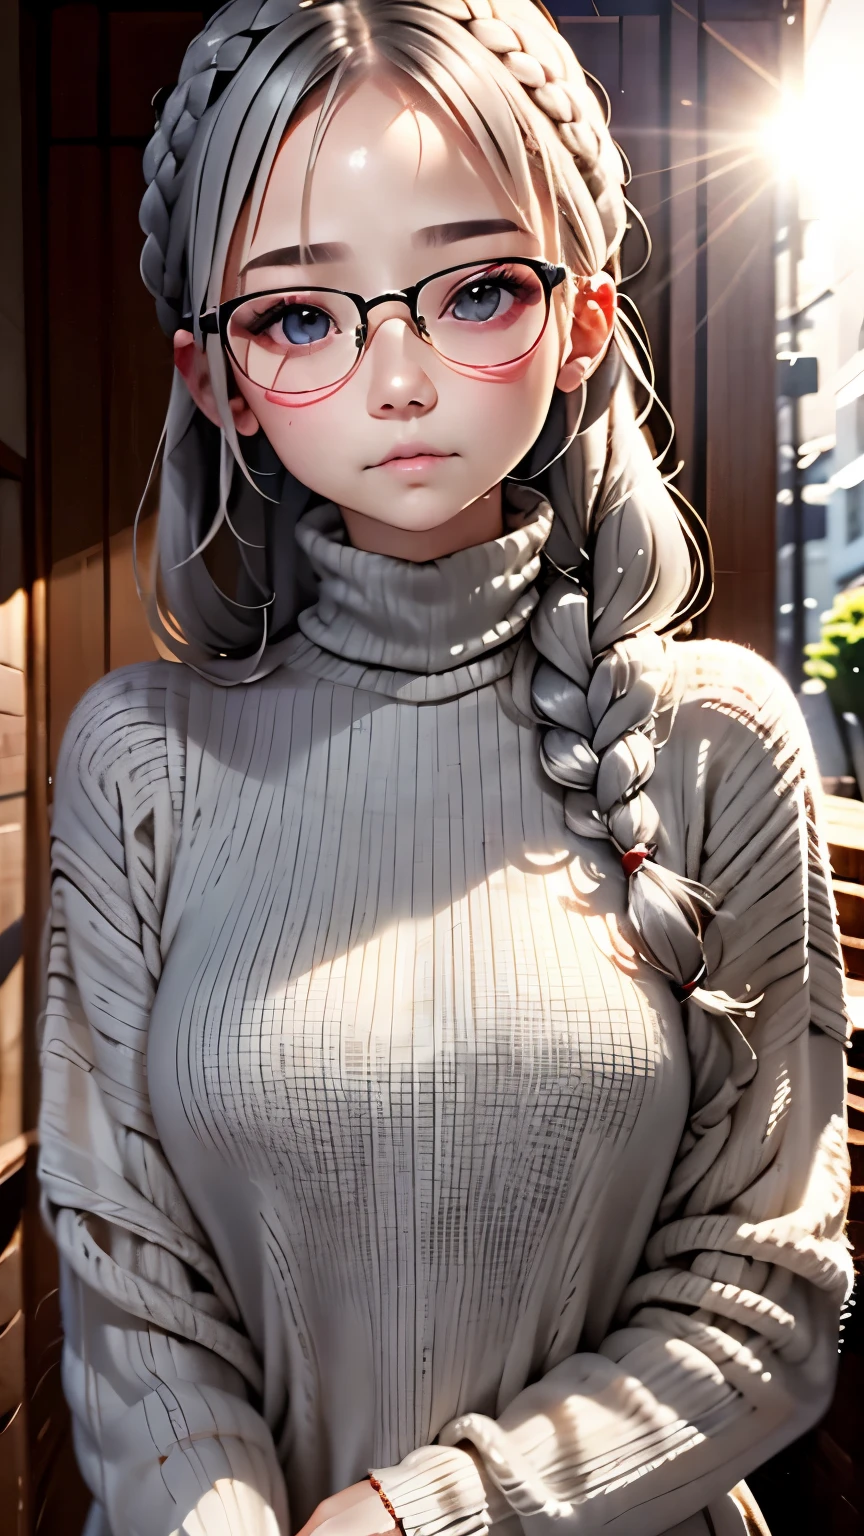 one woman、１4 talents、cozy turtleneck sweater、Upper body angle、Very cute、Perfect good looks、Braid、ash gray hair、glare of the sun、Depth of object being written、blurred background、particles of light、Strange wind、Highest image quality、highest quality、ultra high resolution、master piece